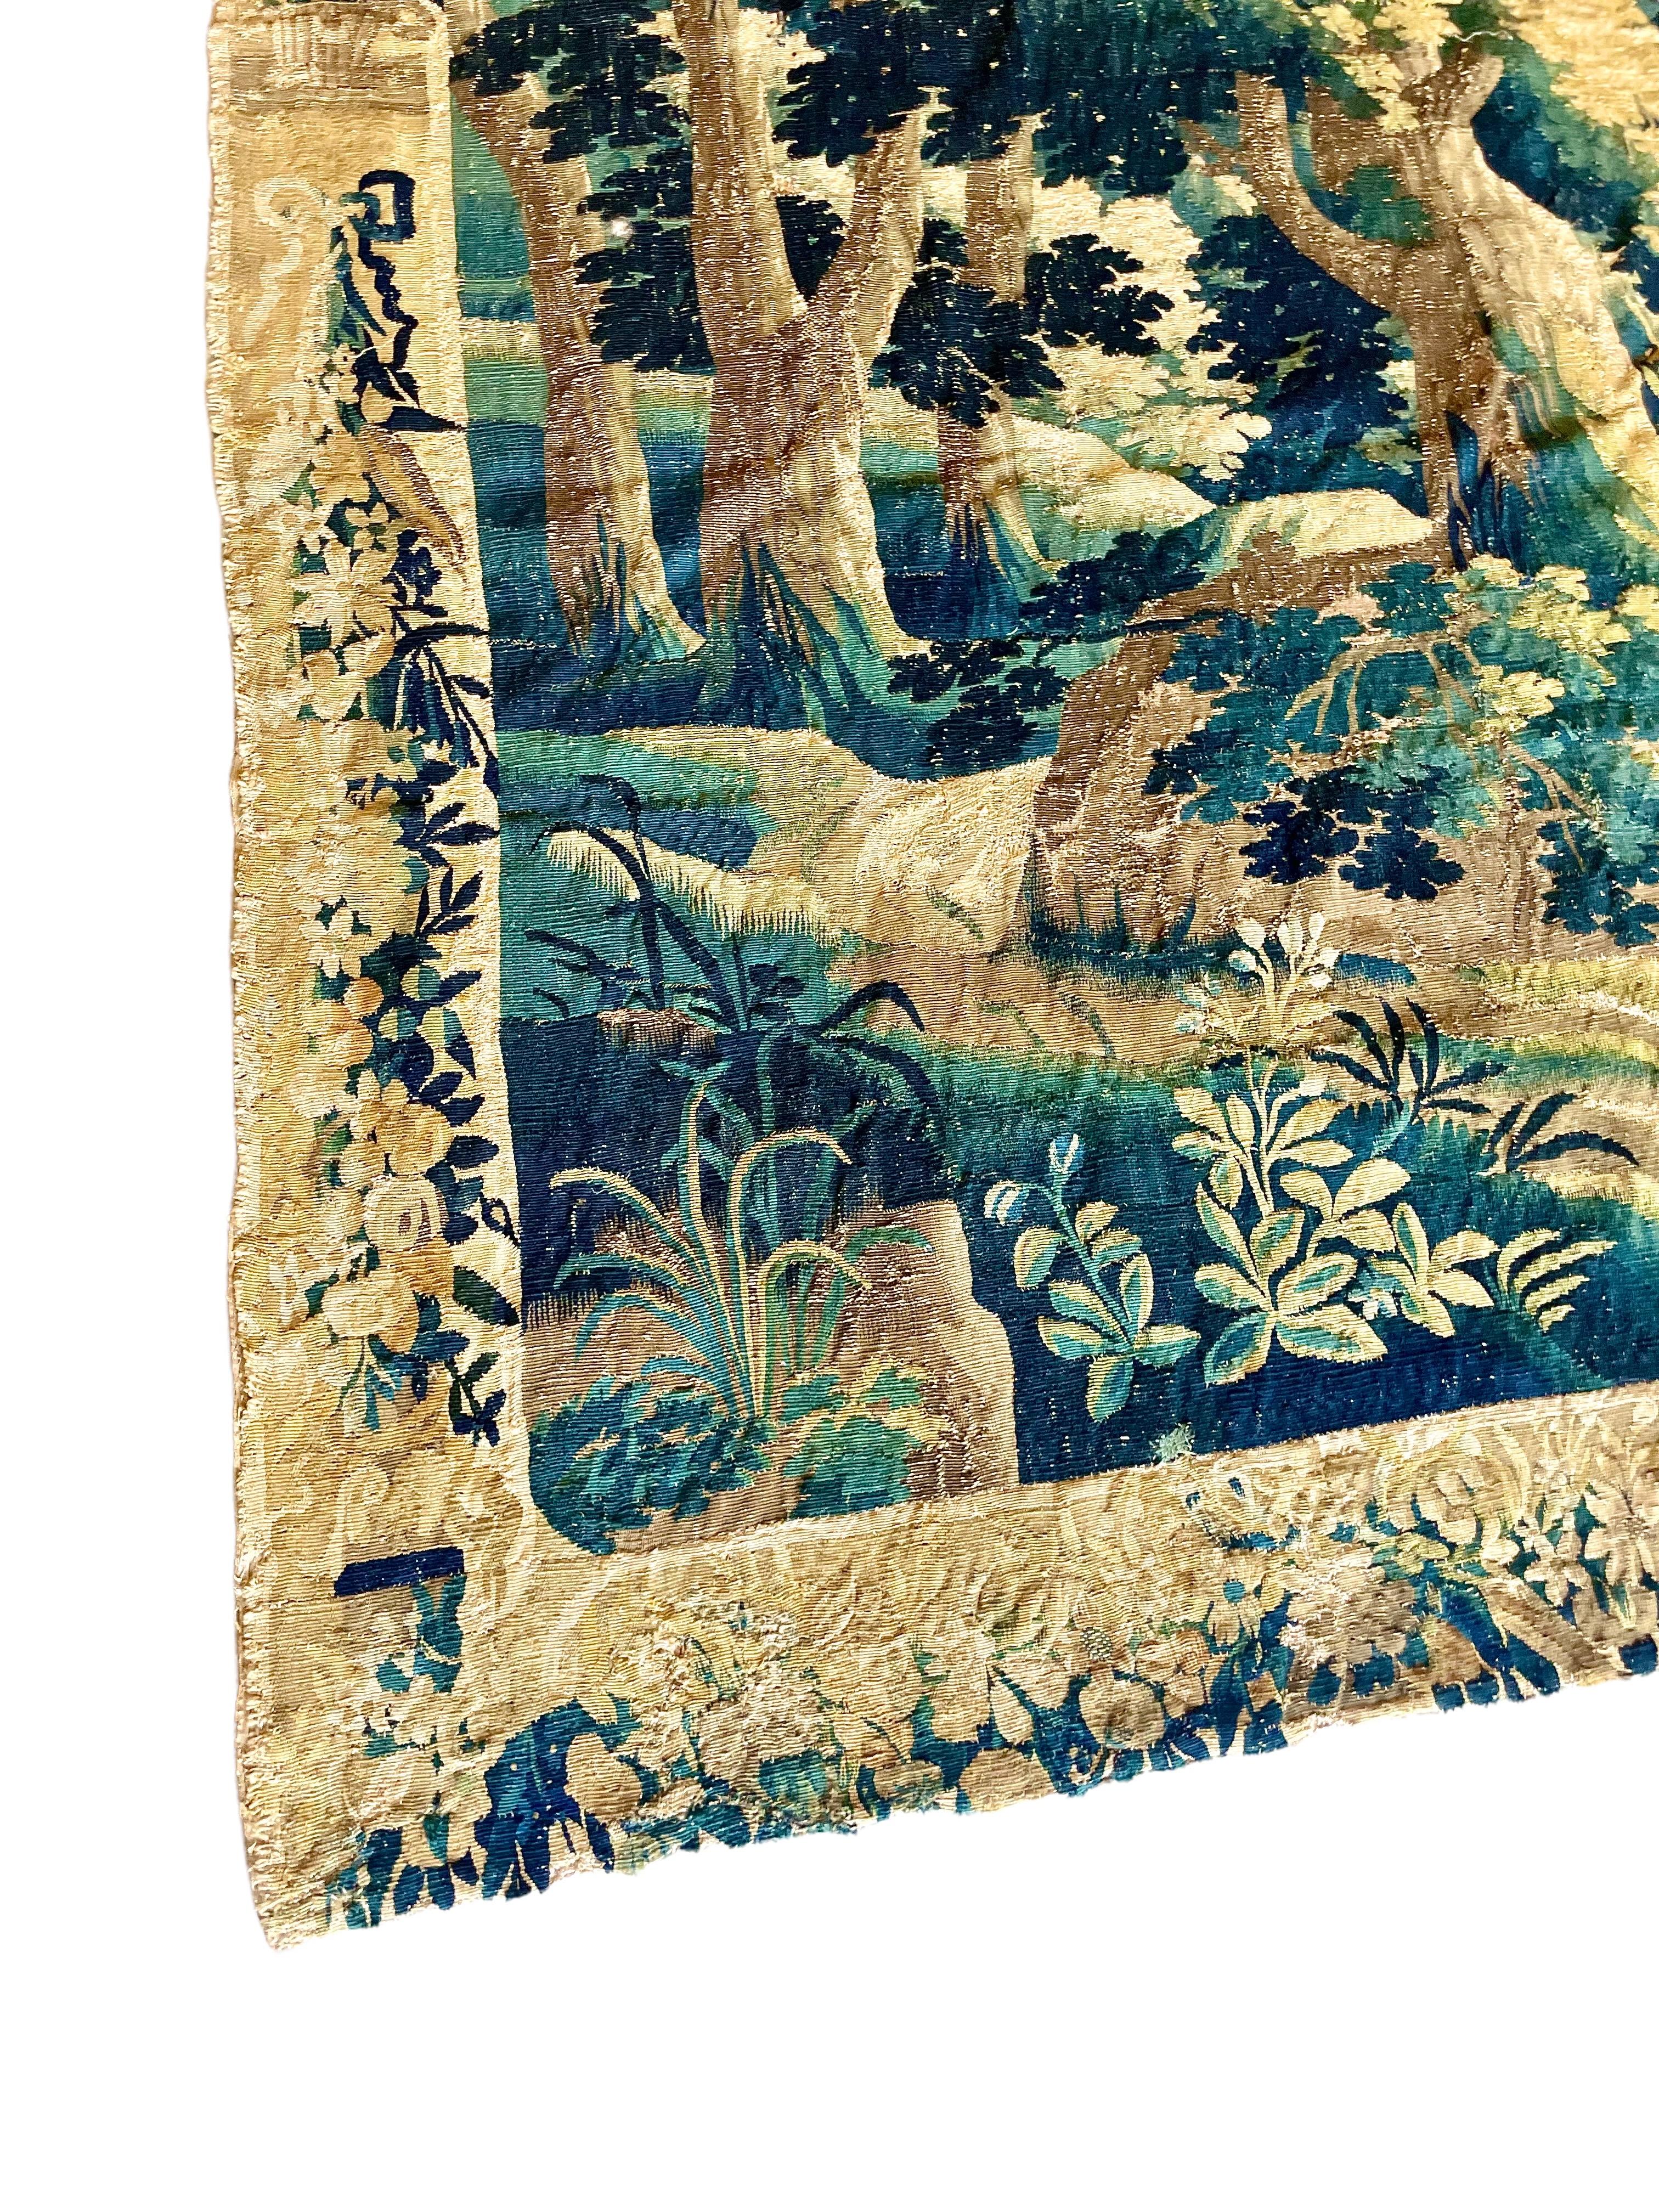 A fine example of an Aubusson 'Verdure' tapestry from the end of the 17th century, depicting a densely wooded landscape, with shrubs and more delicate foliage in the foreground. The tapestry is surrounded by an extravagant floral border. Hand-woven